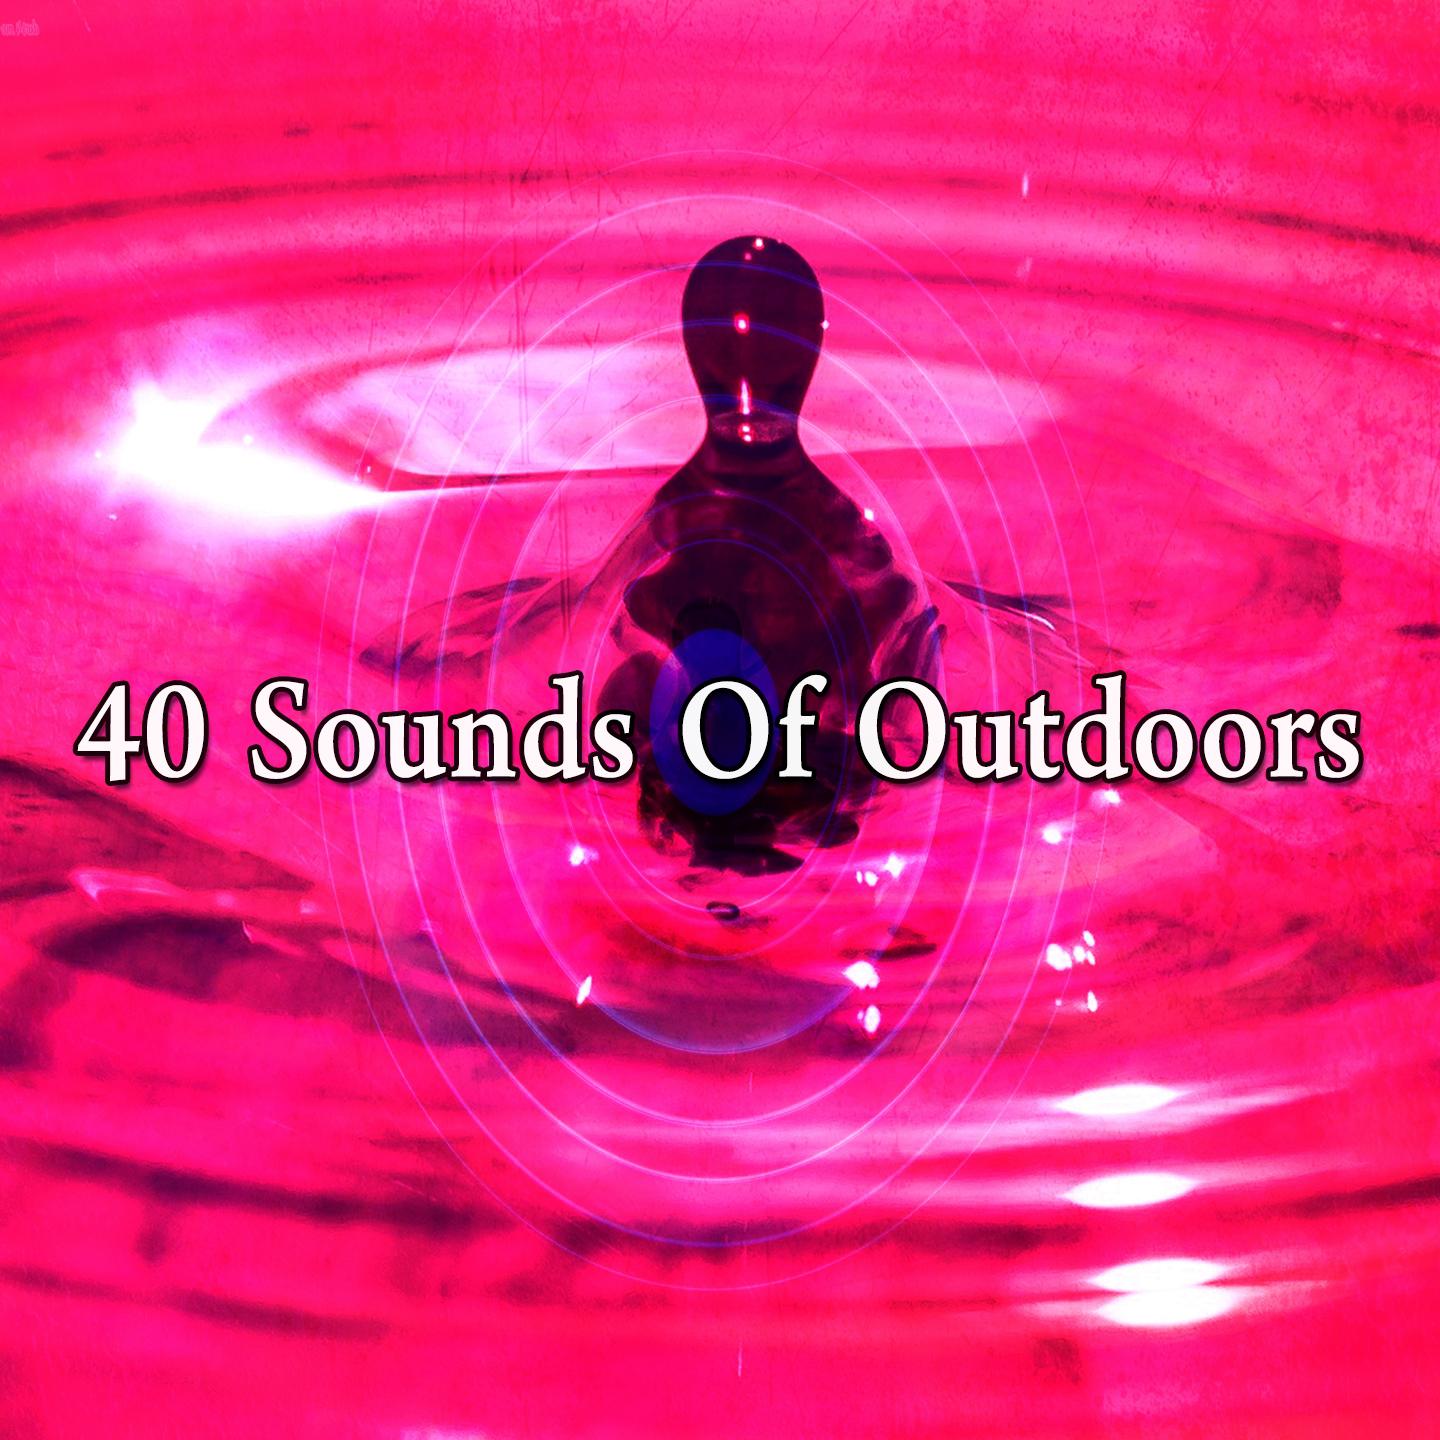 40 Sounds of Outdoors